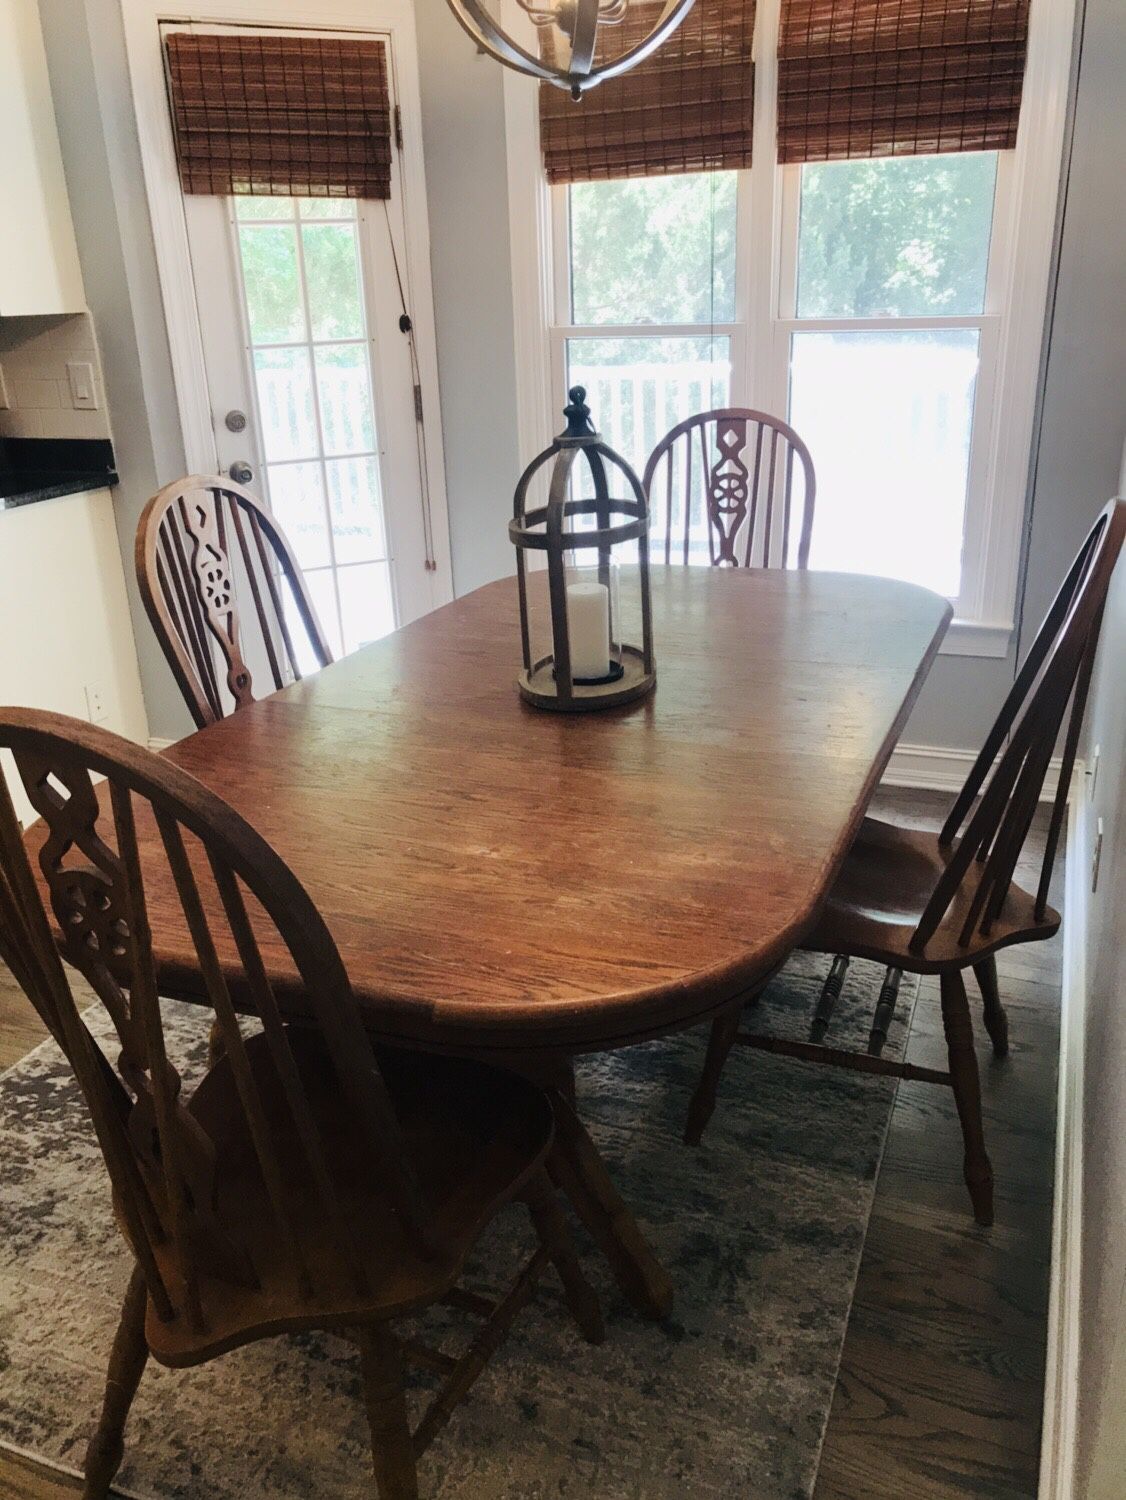 FREE Dining/kitchen table + 4 chairs. MUST PICK UP TODAY